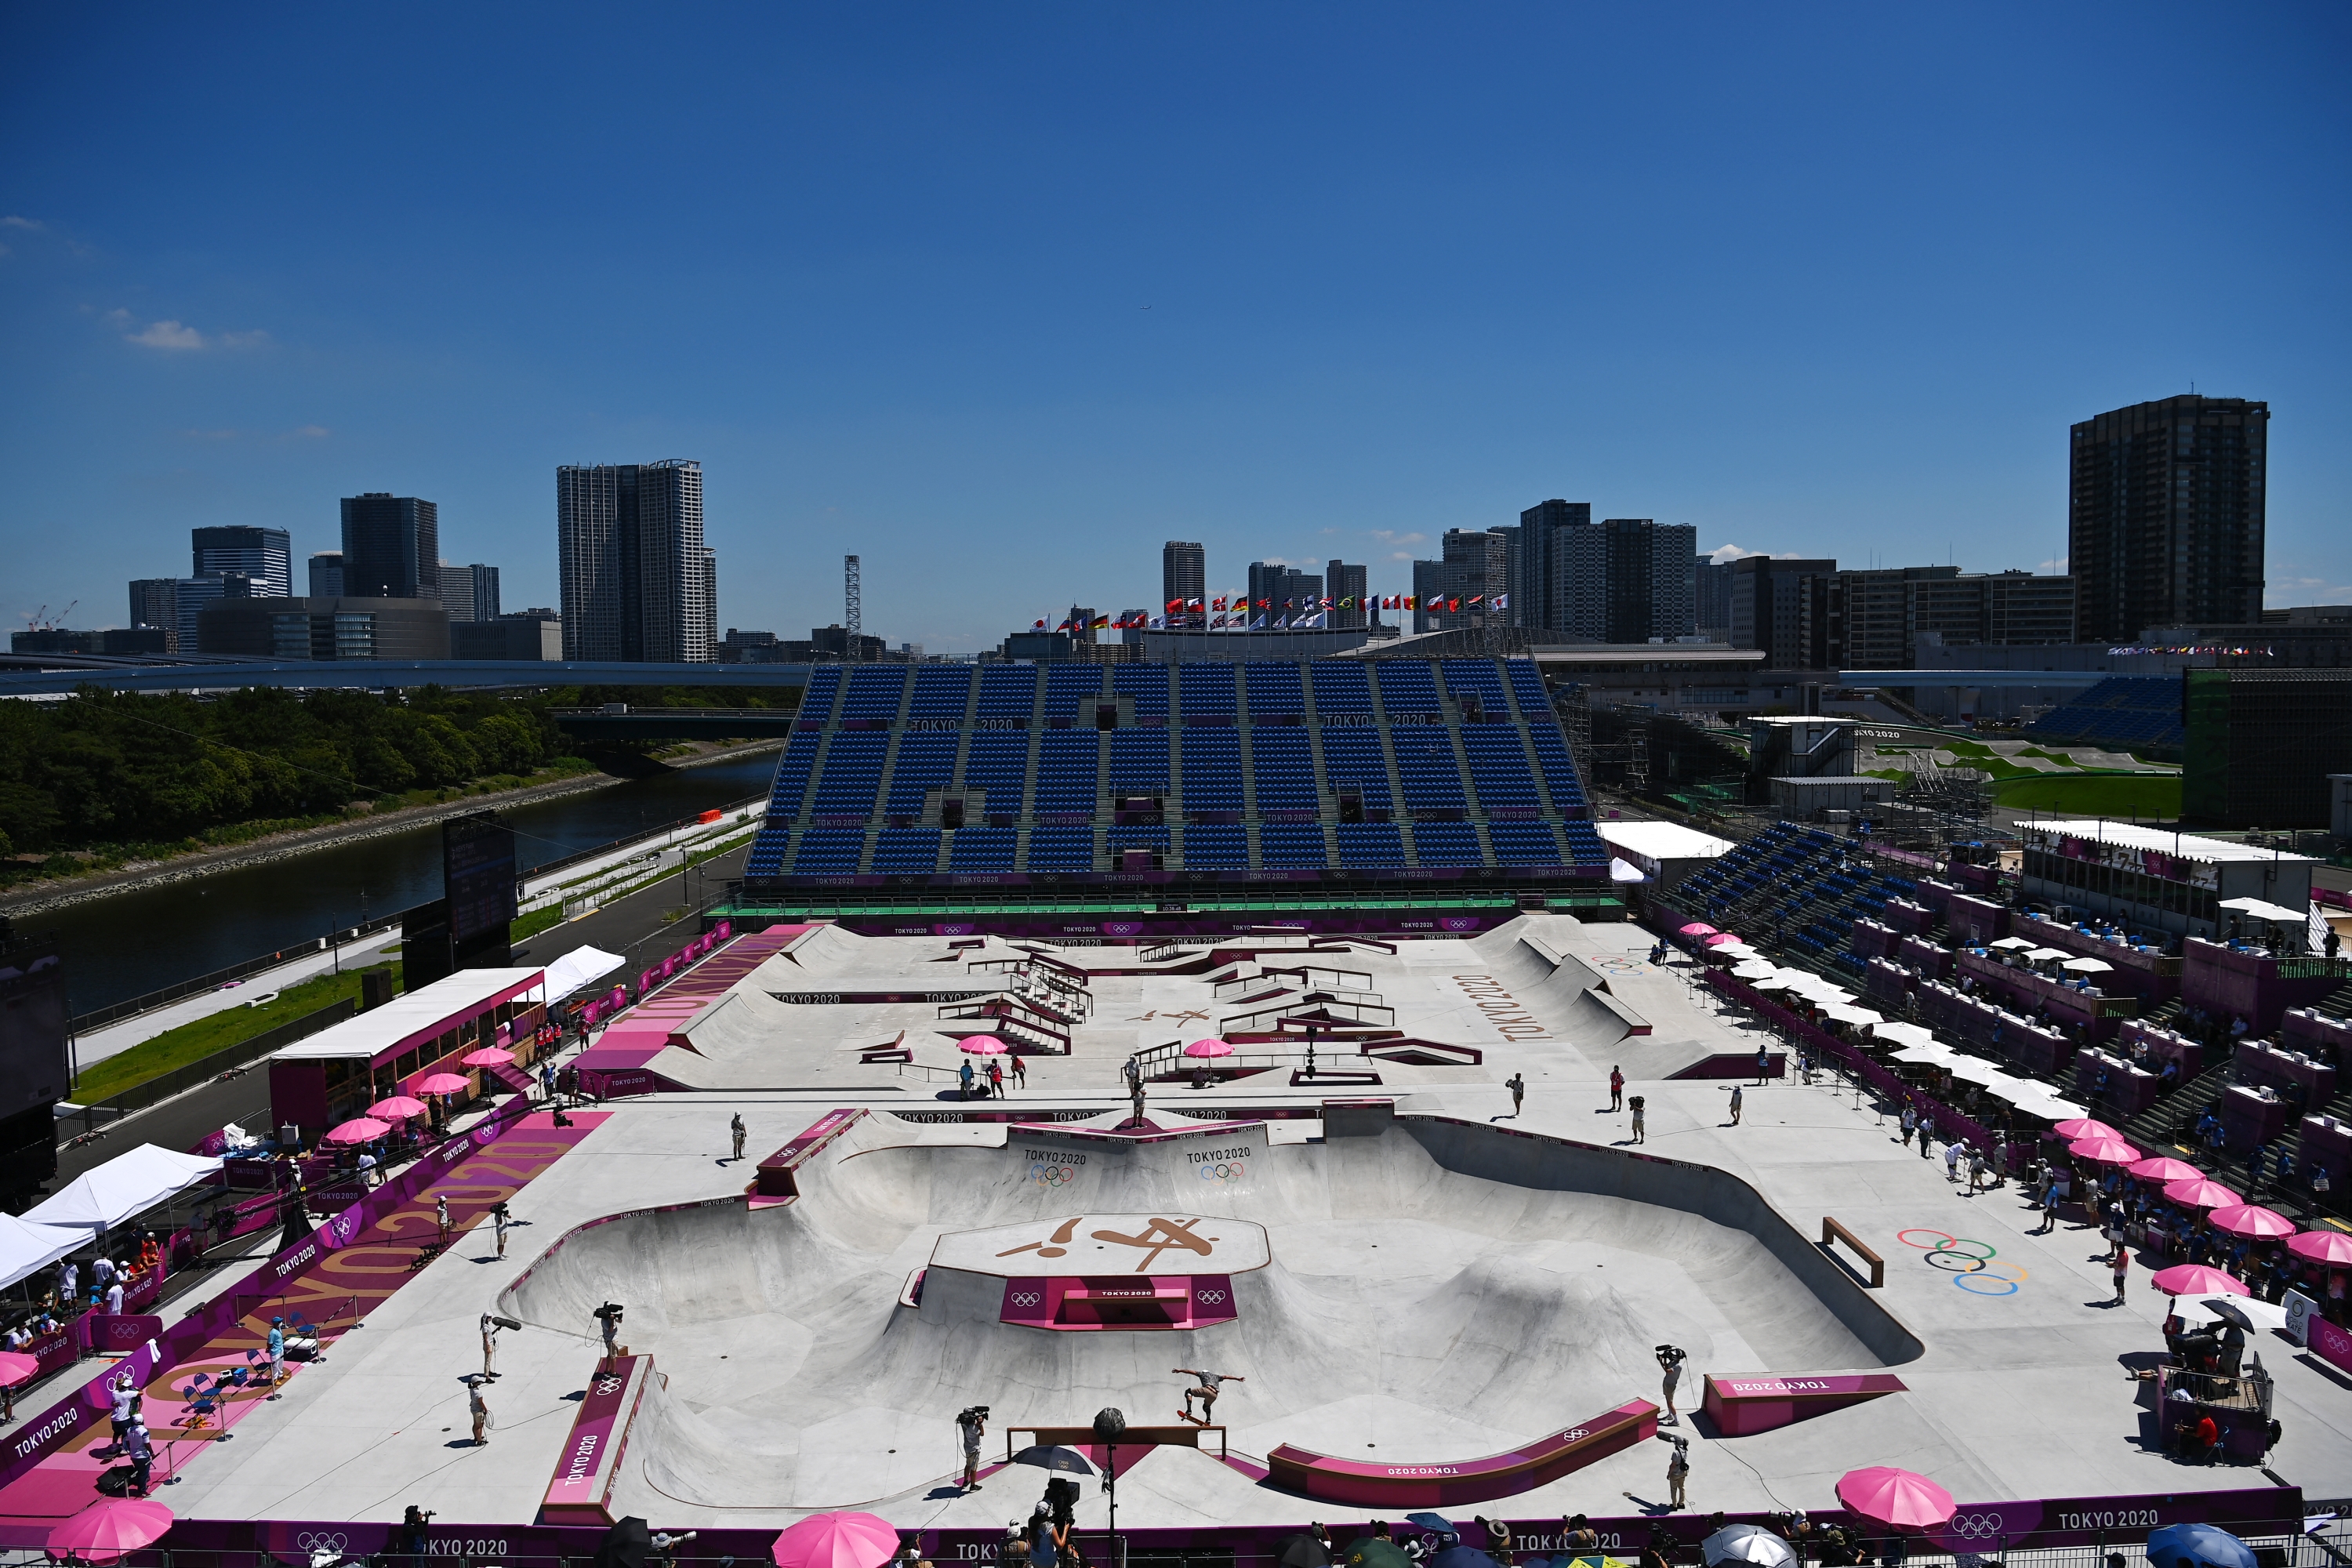 General view of the men's park taken during the Tokyo 2020 Olympic Games at Ariake Sports Park Skateboarding in Tokyo on August 05, 2021. (Photo by Loic VENANCE / AFP)